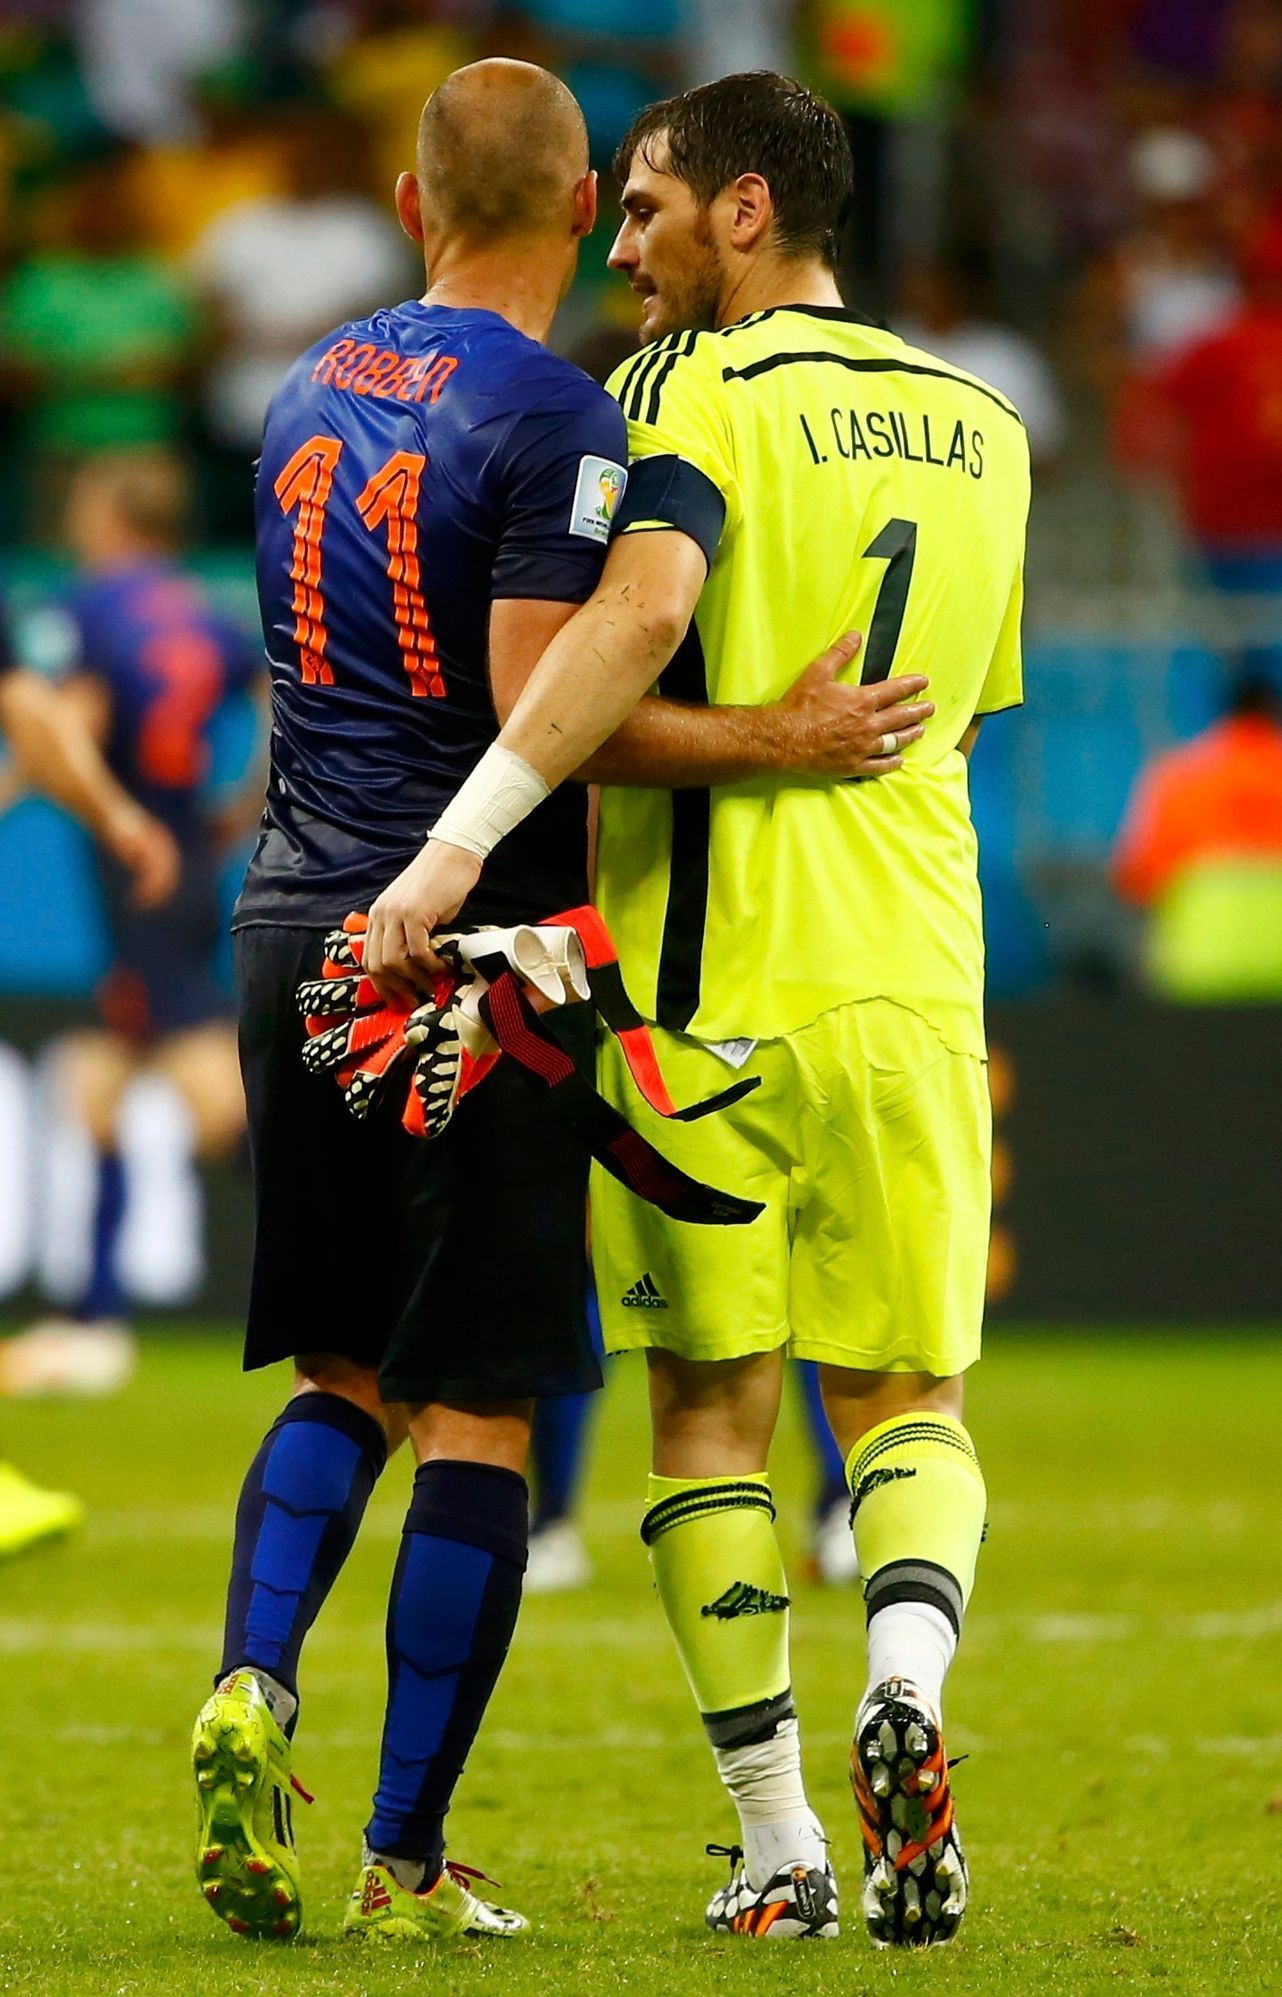 Robben of the Netherlands and Spain's Casillas acknowledge each other after their 2014 World Cup Group B soccer match at the Fonte Nova arena in Salvador